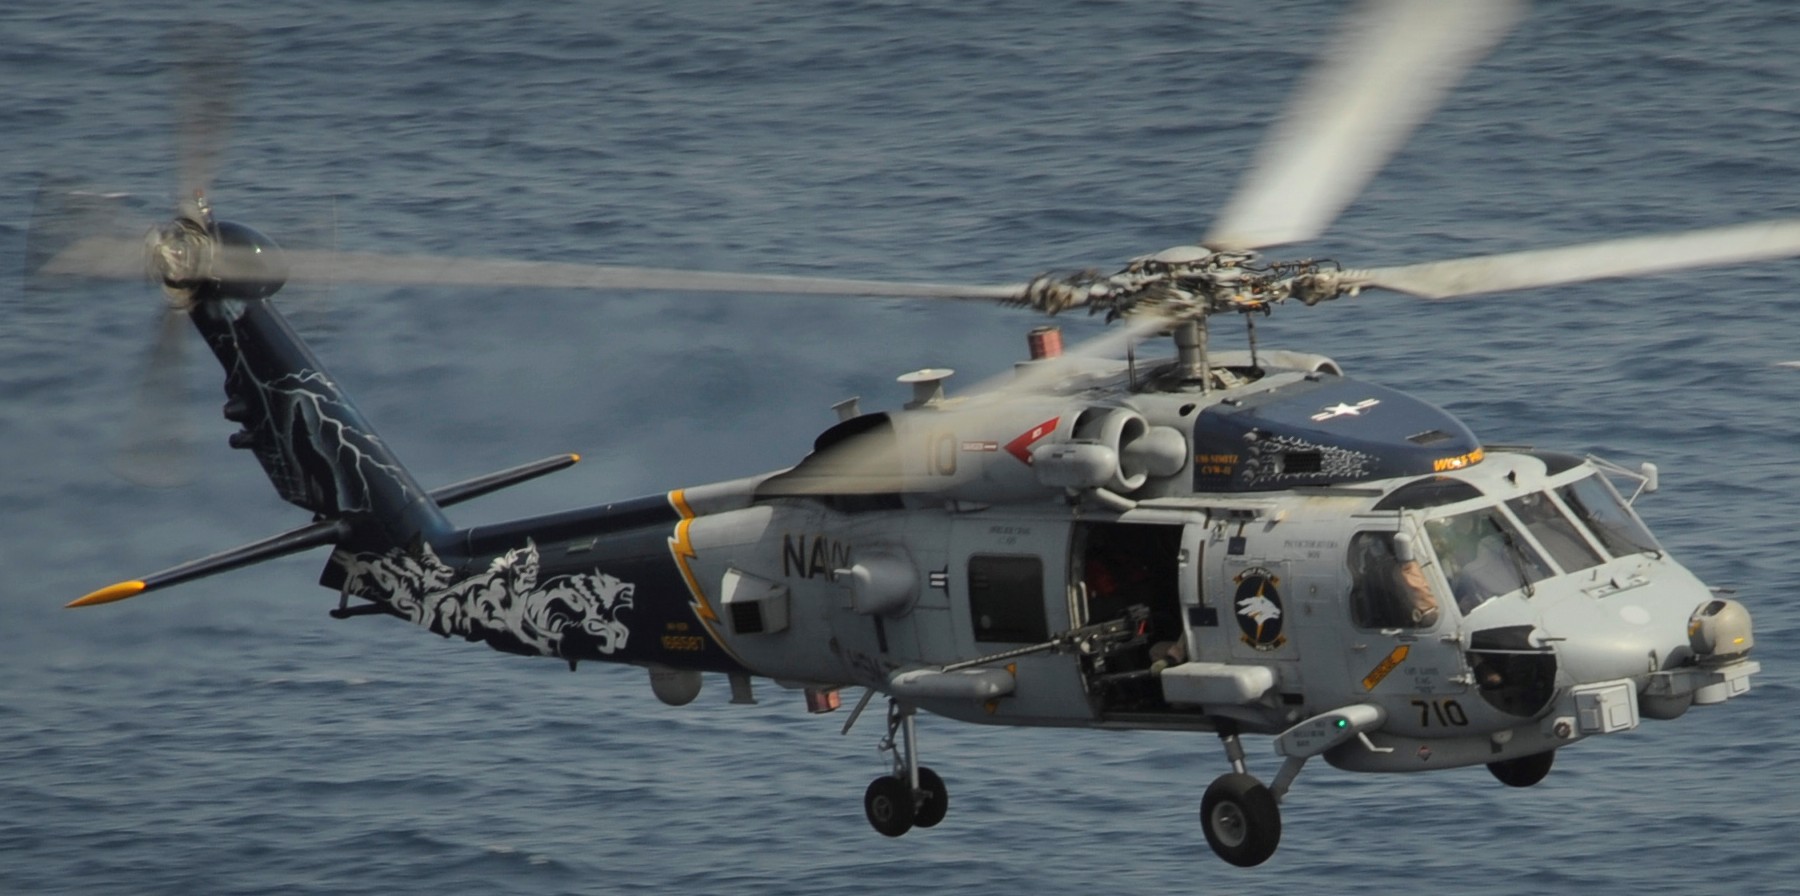 hsm-75 wolf pack helicopter maritime strike squadron mh-60r seahawk 23